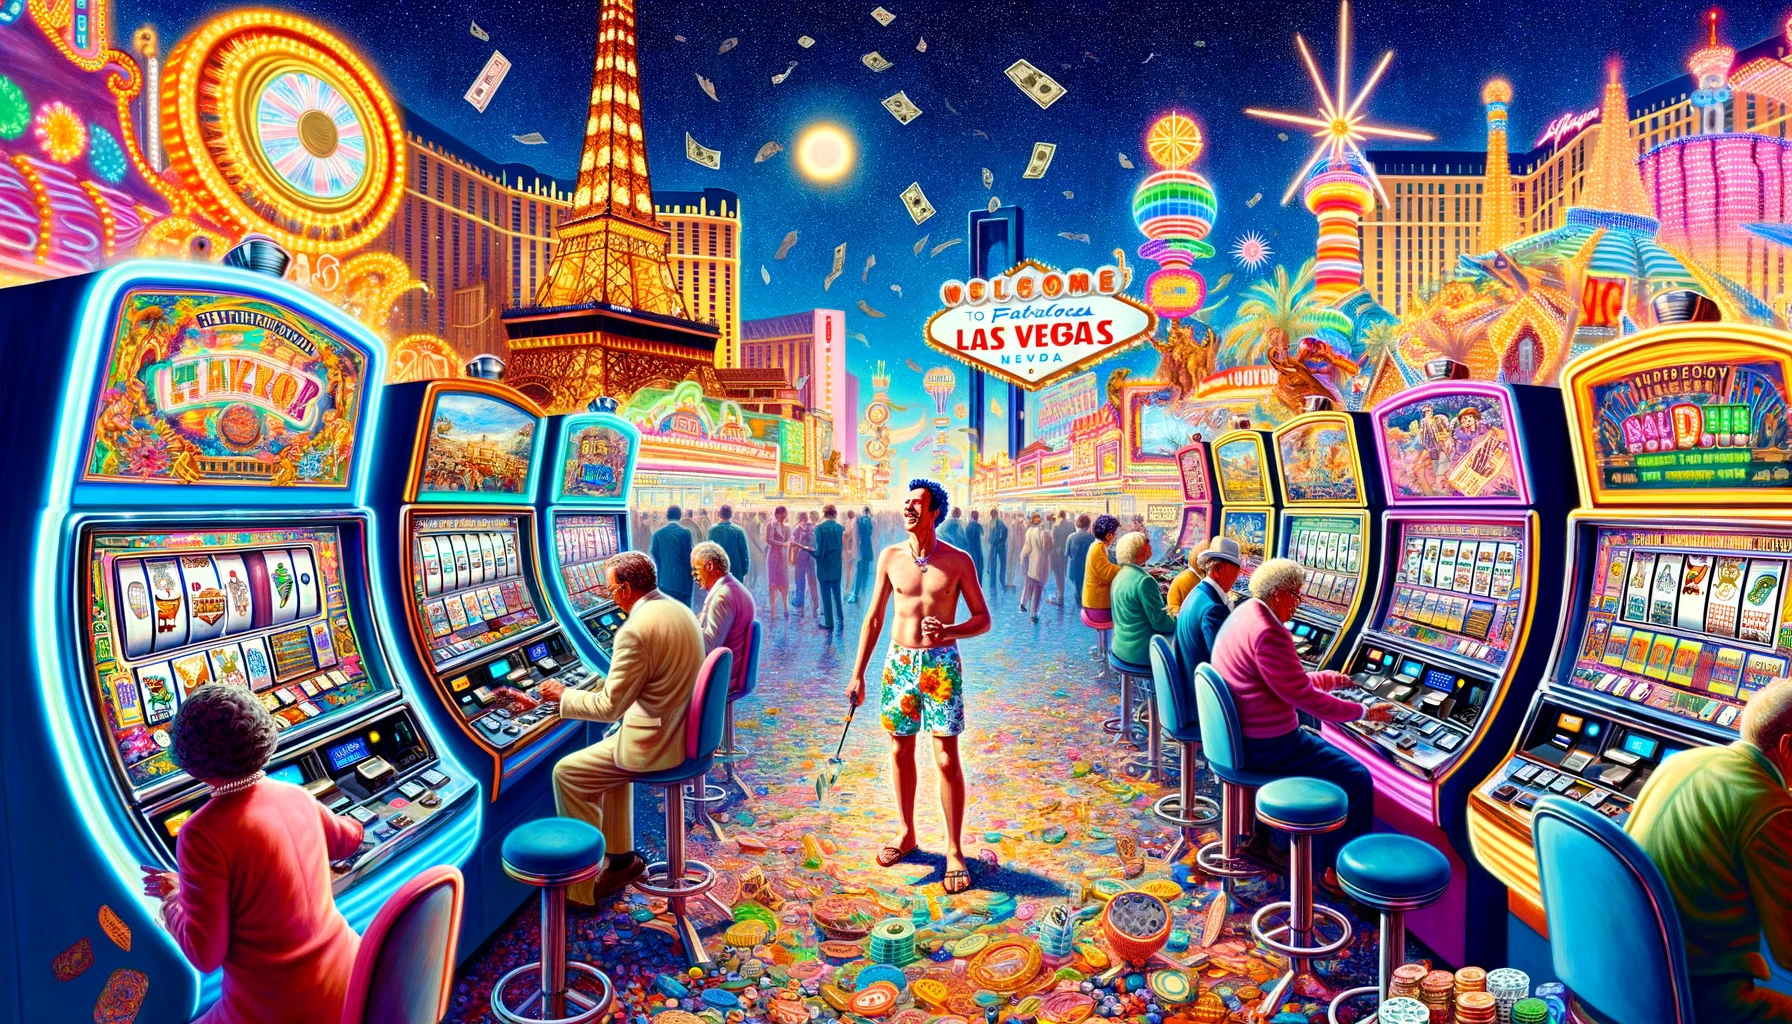 A vivid scene capturing a man's moment of joy and liberation as he plays slots in his swimwear, undisturbed by the bustling casino around him, symbolizing the essence of embracing one's true self against societal norms.